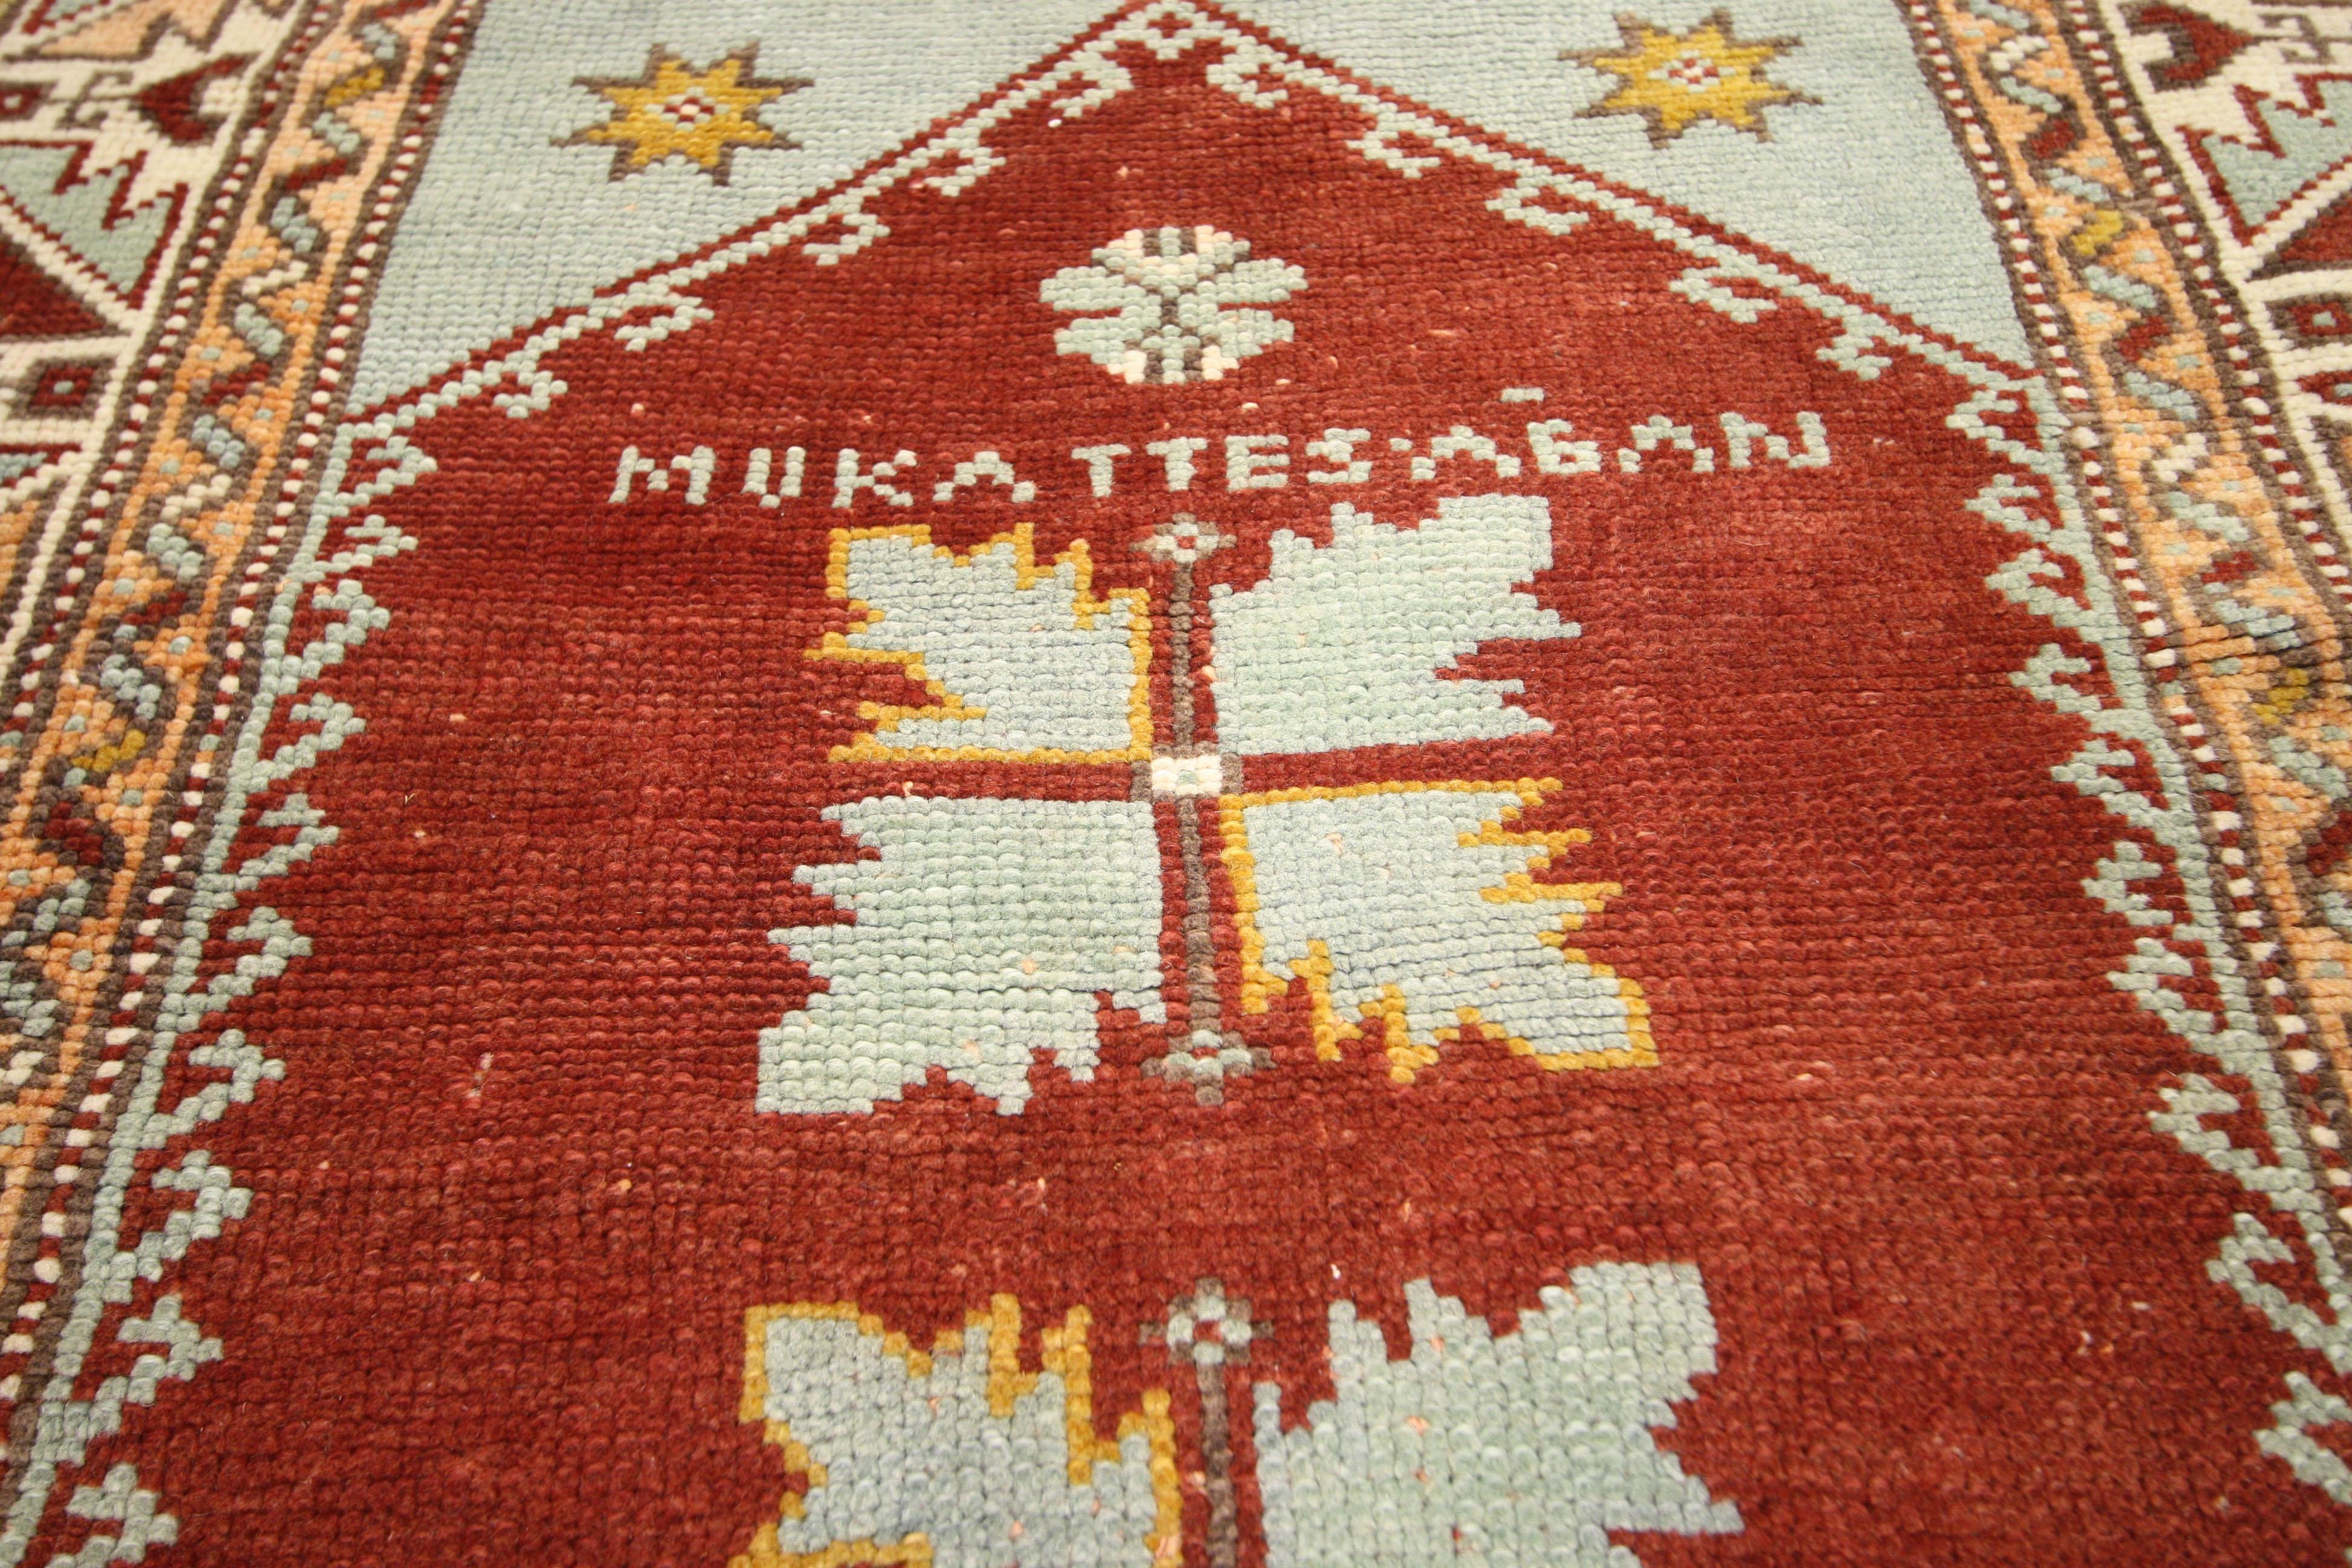 52320 Vintage Turkish Oushak rug for kitchen, bath, foyer or entryway or prayer rug 02'09 x 03'07. This hand-knotted wool vintage Oushak rug could also be used as a Turkish Prayer rug. It features an inner latch-hook mihrab niche dotted with